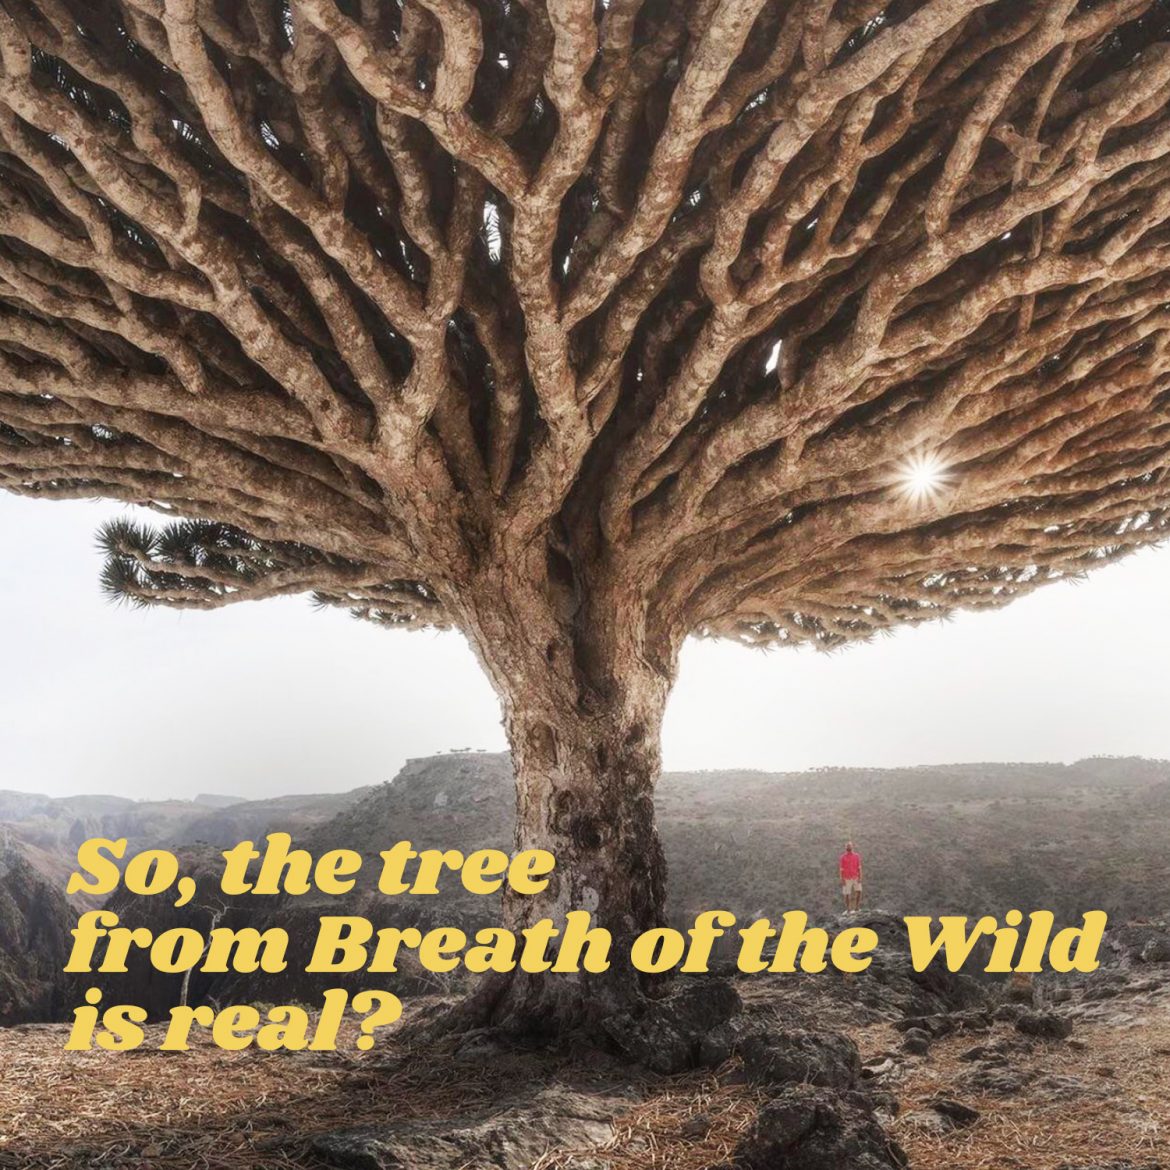 So, the tree from Breath of the Wild is real?